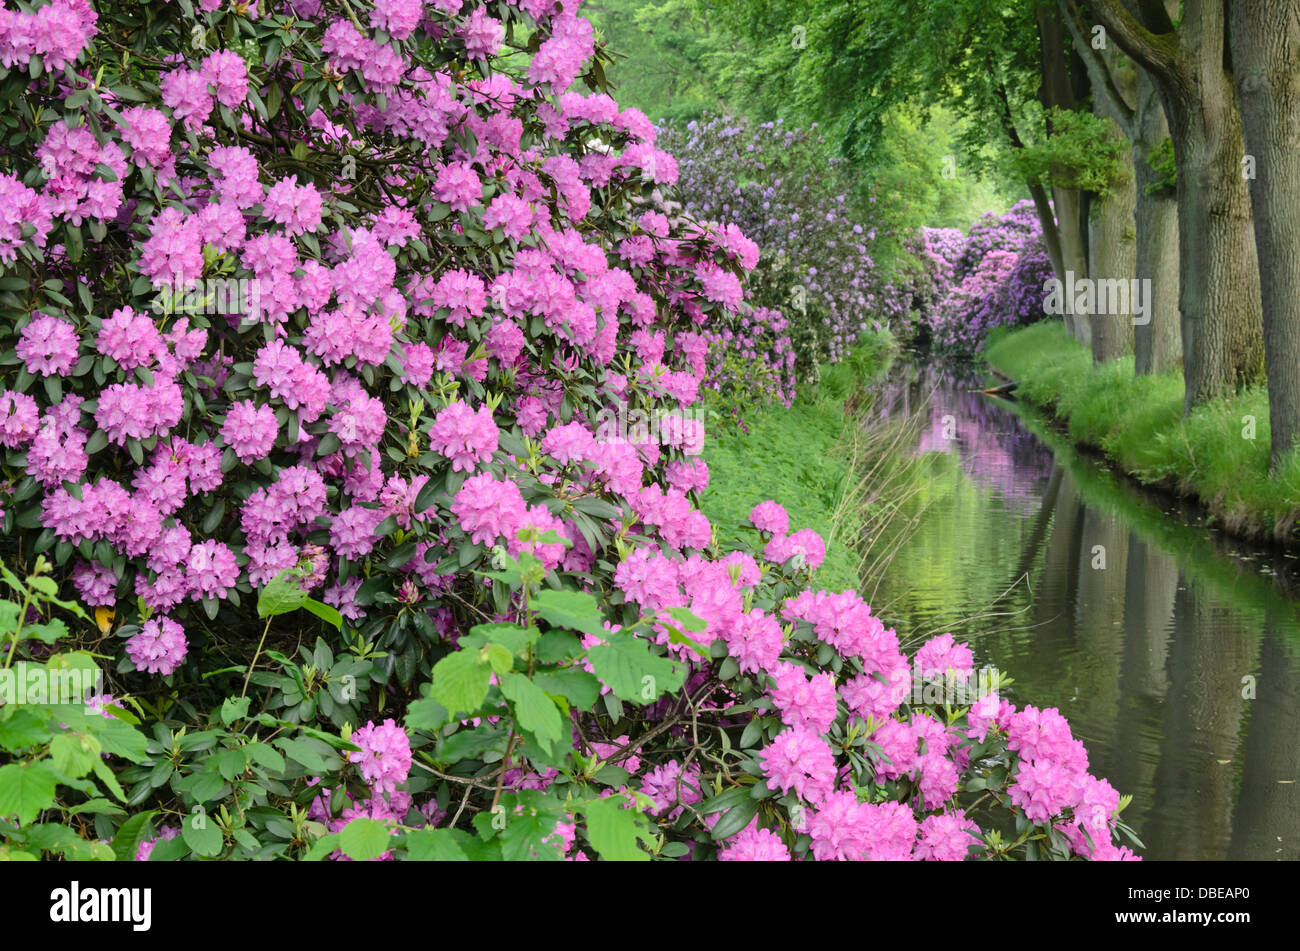 Catawba rhododendron (Rhododendron catawbiense) at a water ditch Stock Photo